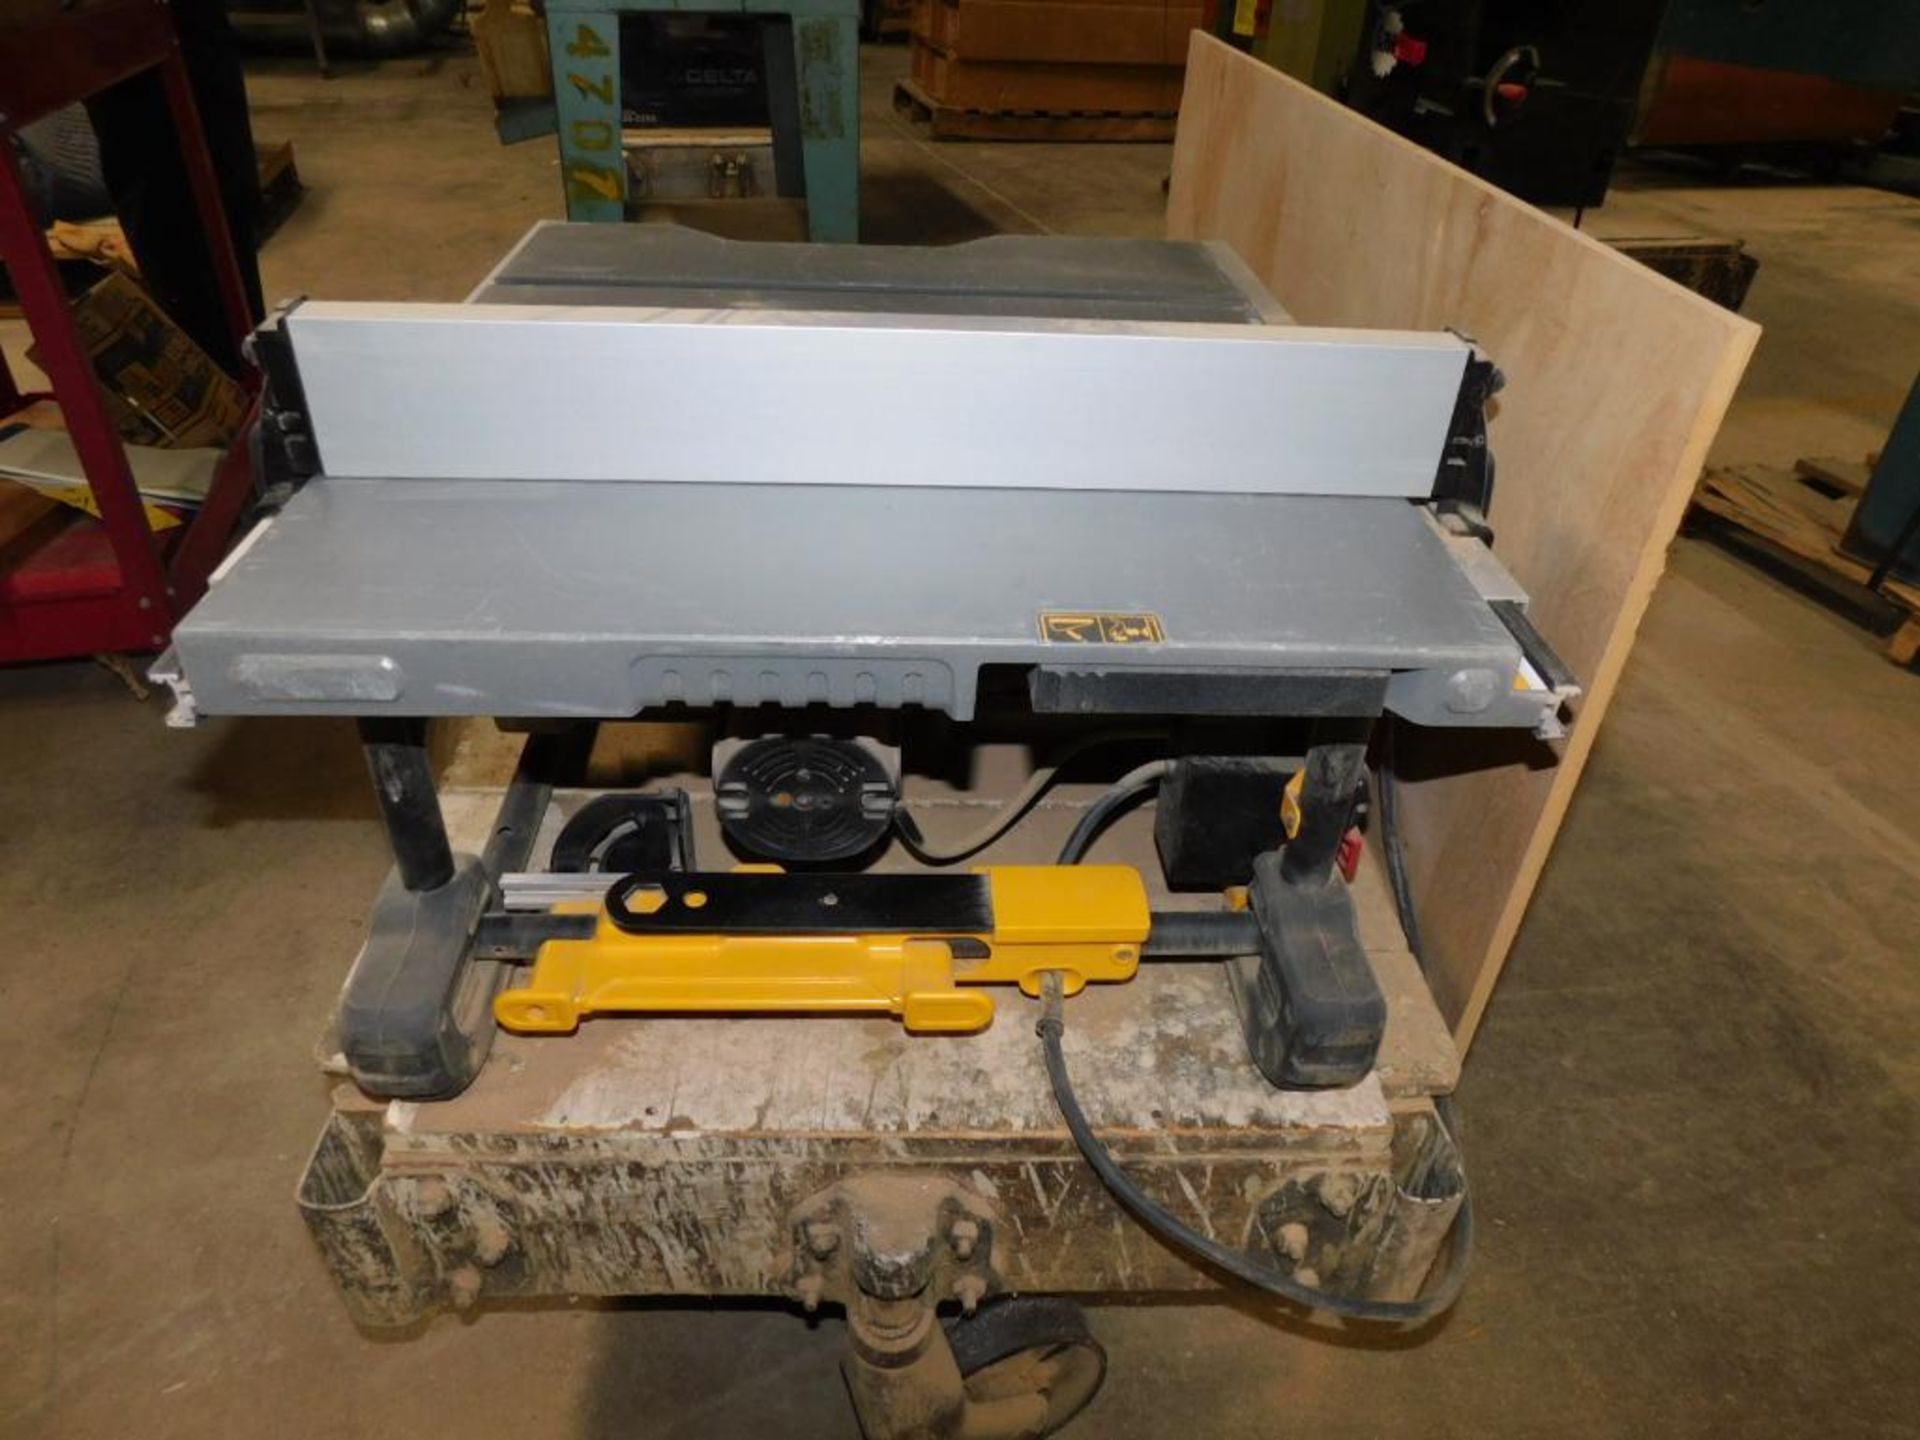 Dewalt Portable 10" Table Saw w/Stand & Rolling Shop Cart - Image 3 of 5